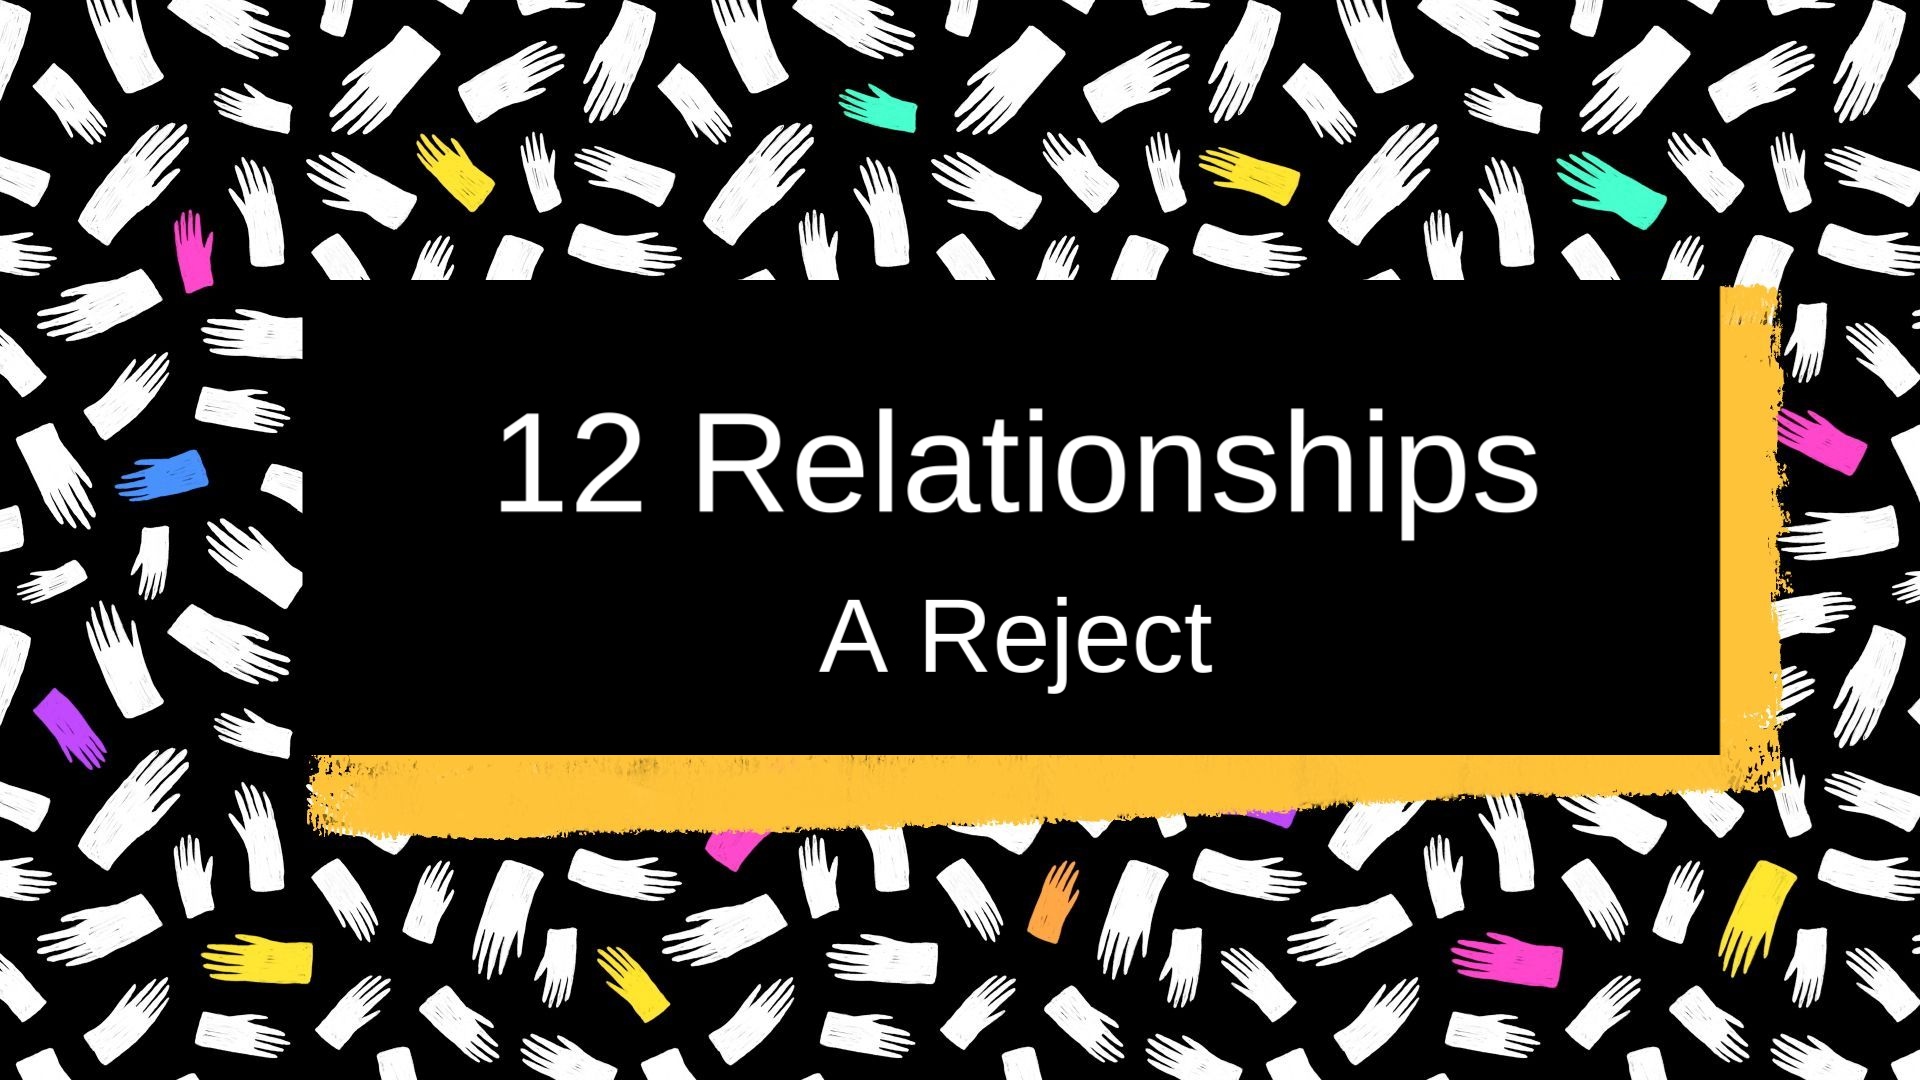 12 Relationships: A Reject